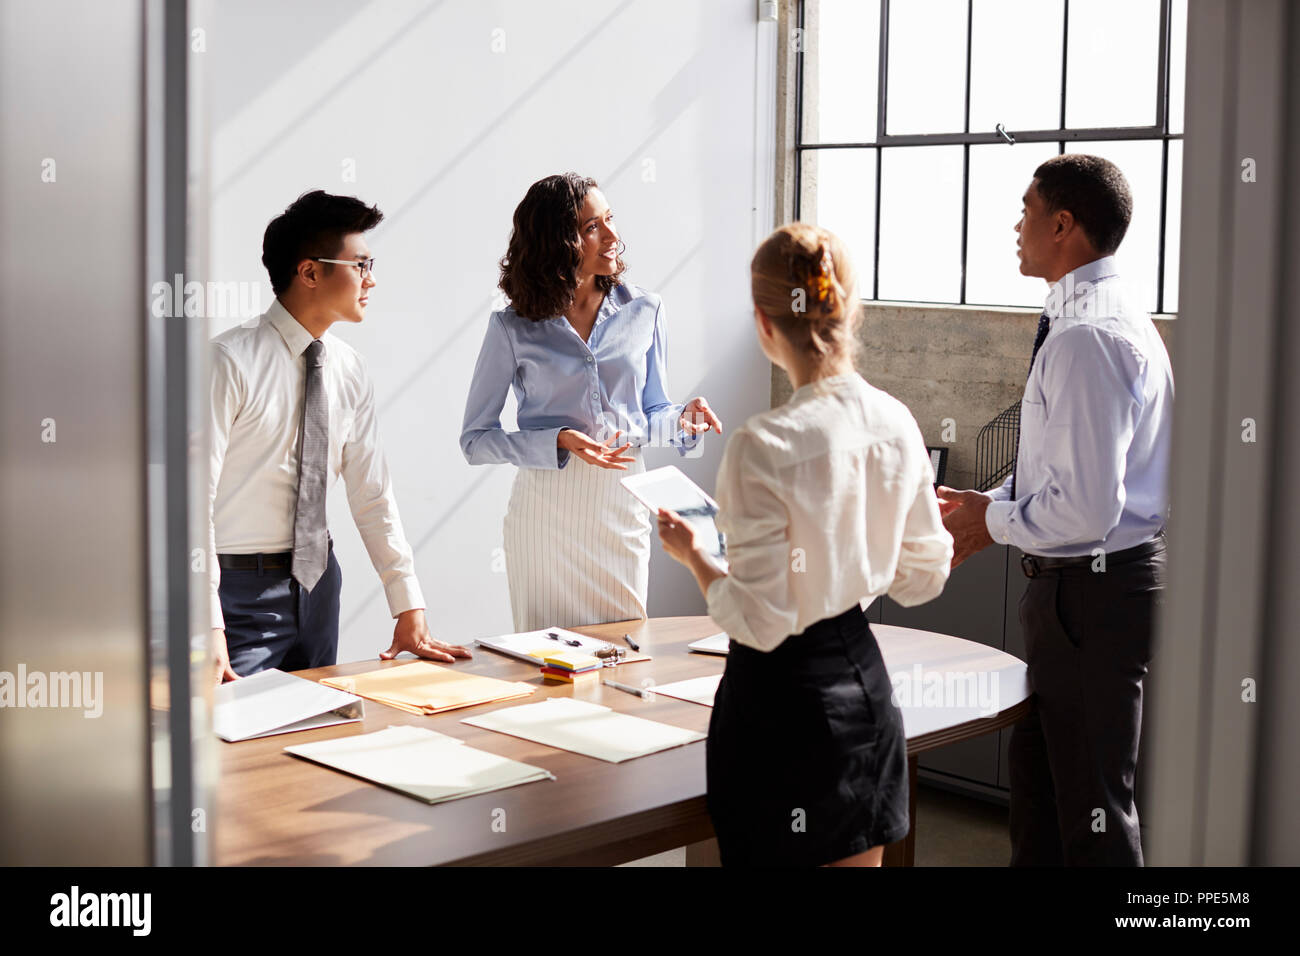 Four business colleagues working together in a small office Stock Photo